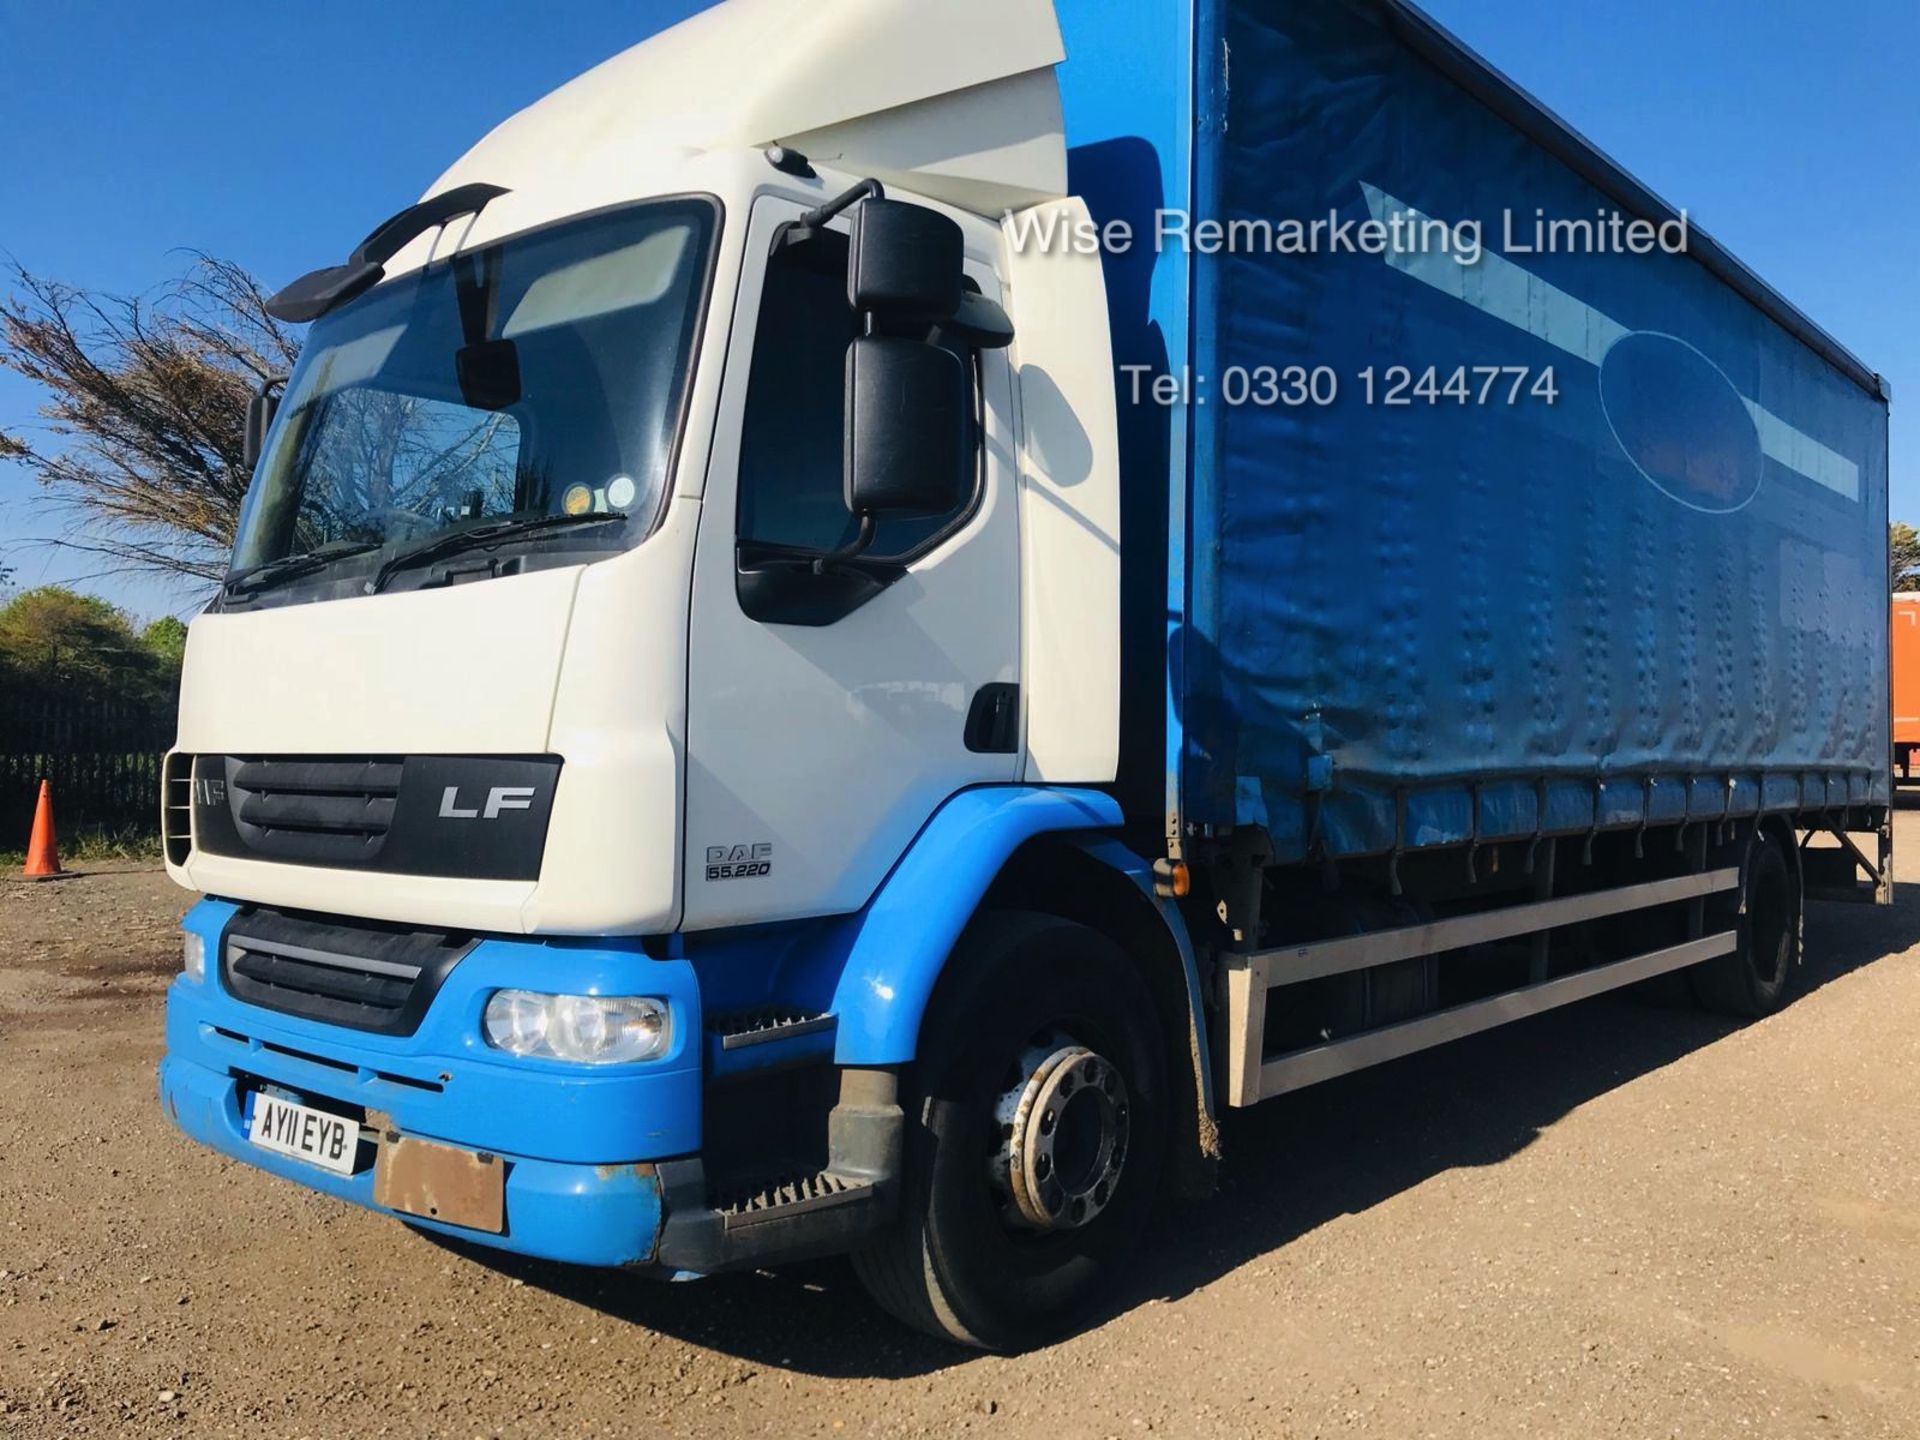 (RESERVE MET) Daf LF 55.220 Curtainsider (6692cc) Auto - 2011 11 Reg - Tail Lift - Air Con - NO VAT - Image 6 of 17